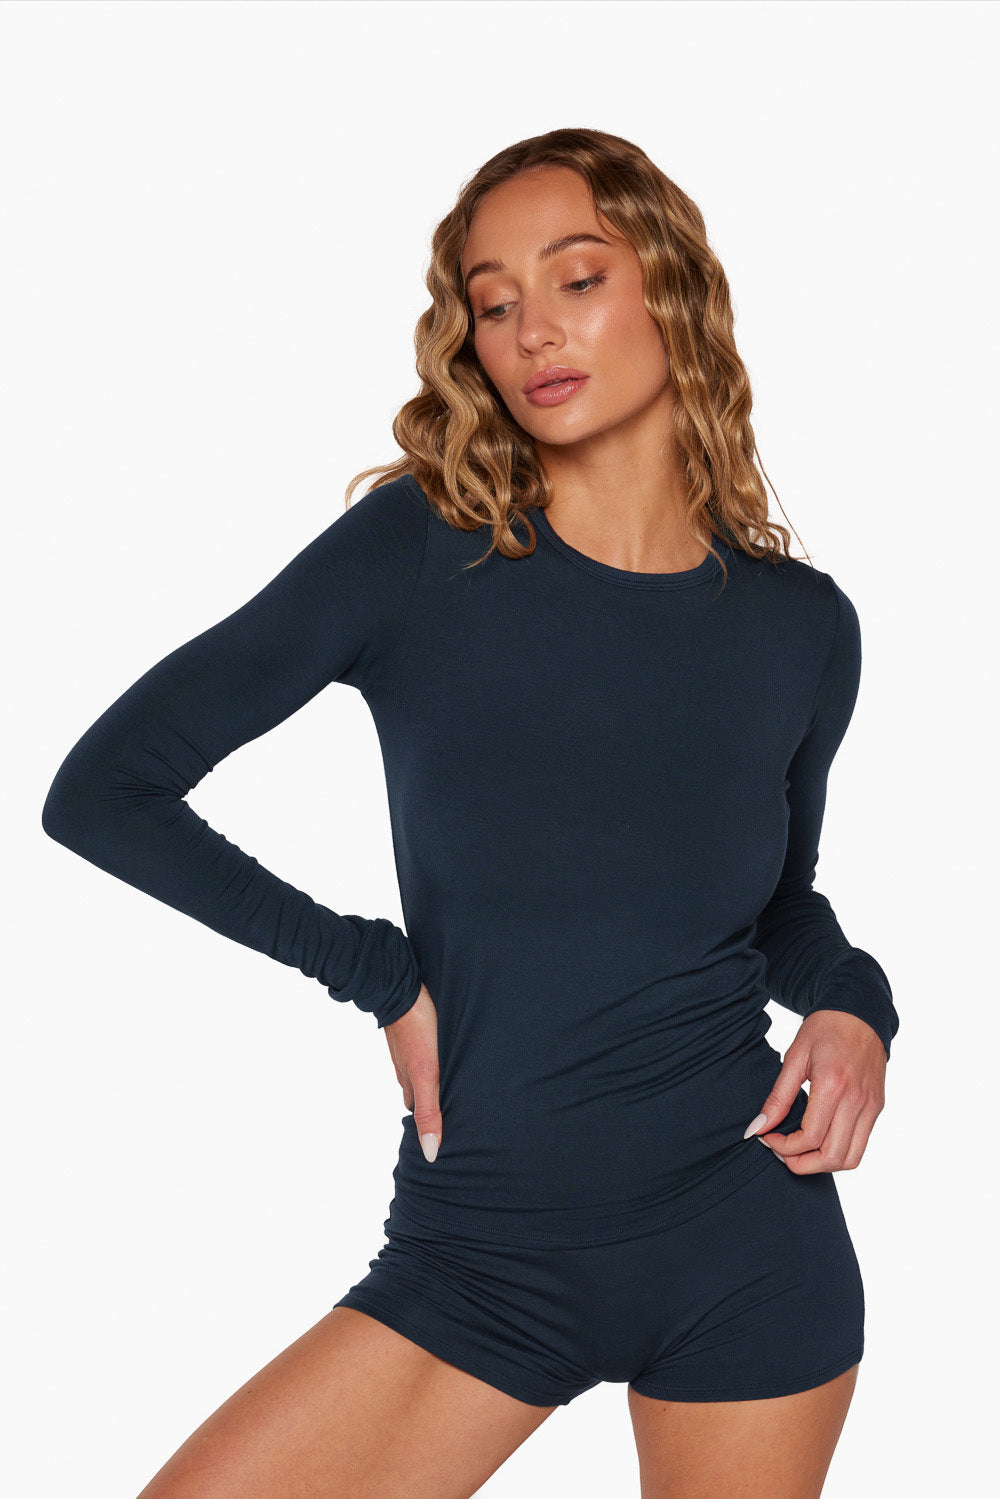 SLEEP JERSEY FITTED LONG SLEEVE - OXFORD Featured Image